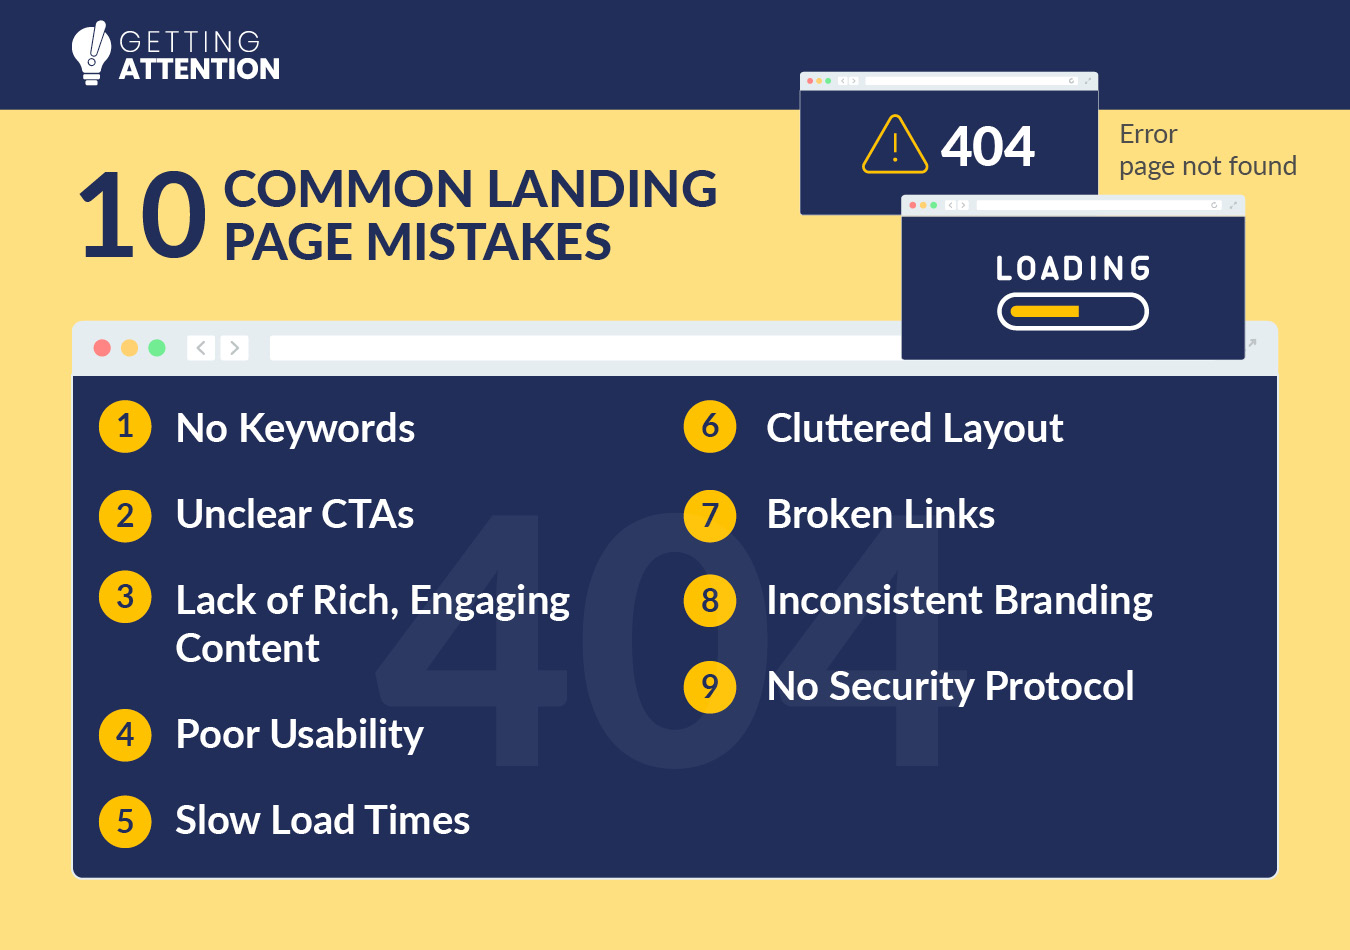 Avoid these 10 common landing page mistakes that can negatively impact your Google Ad Grant, written below.